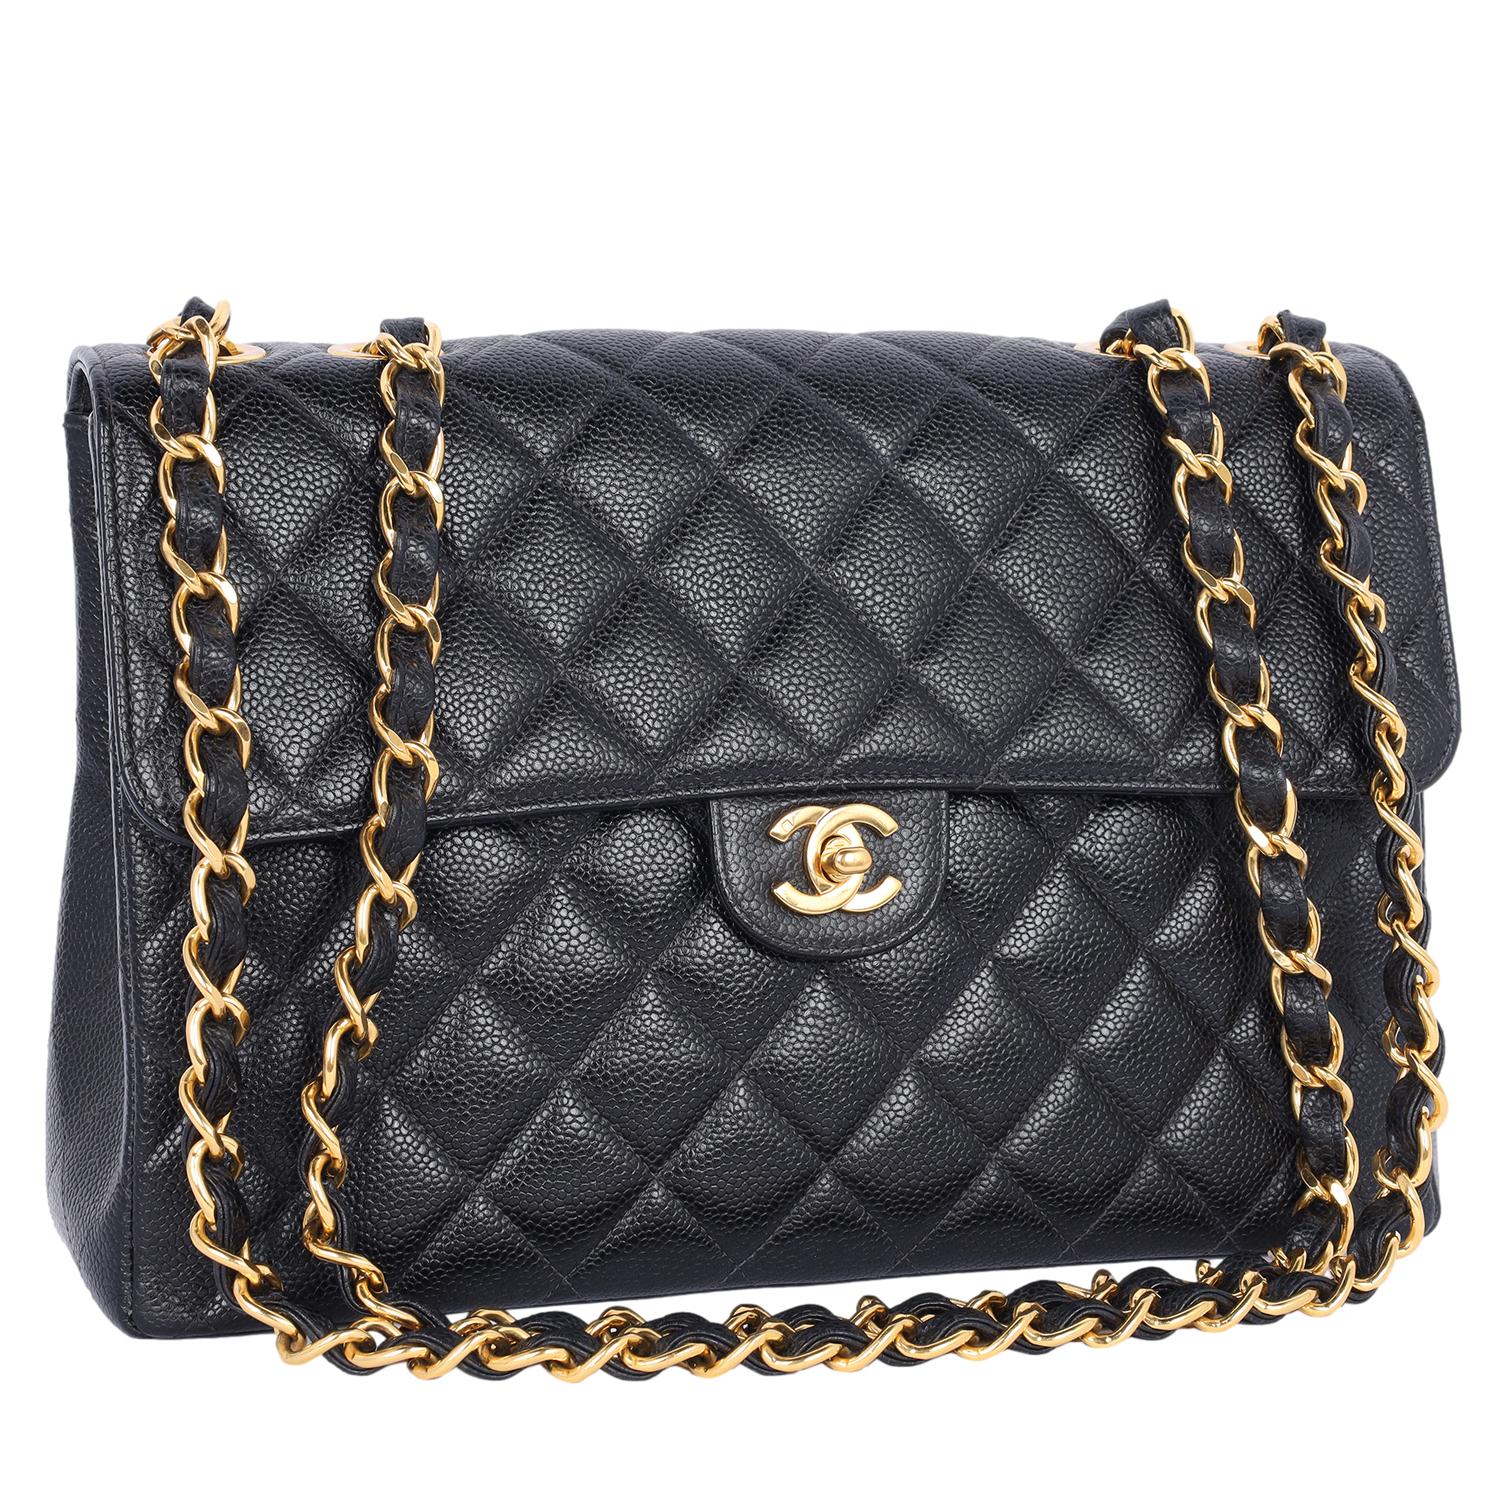 Authentic, pre-loved Chanel CC classic flap jumbo quilted black caviar leather cross body bag. Features flap top with 24kt gold plating CC twist turn lock on the front of the bag, the exterior rear has 1 open side pocket, the interior has Chanel